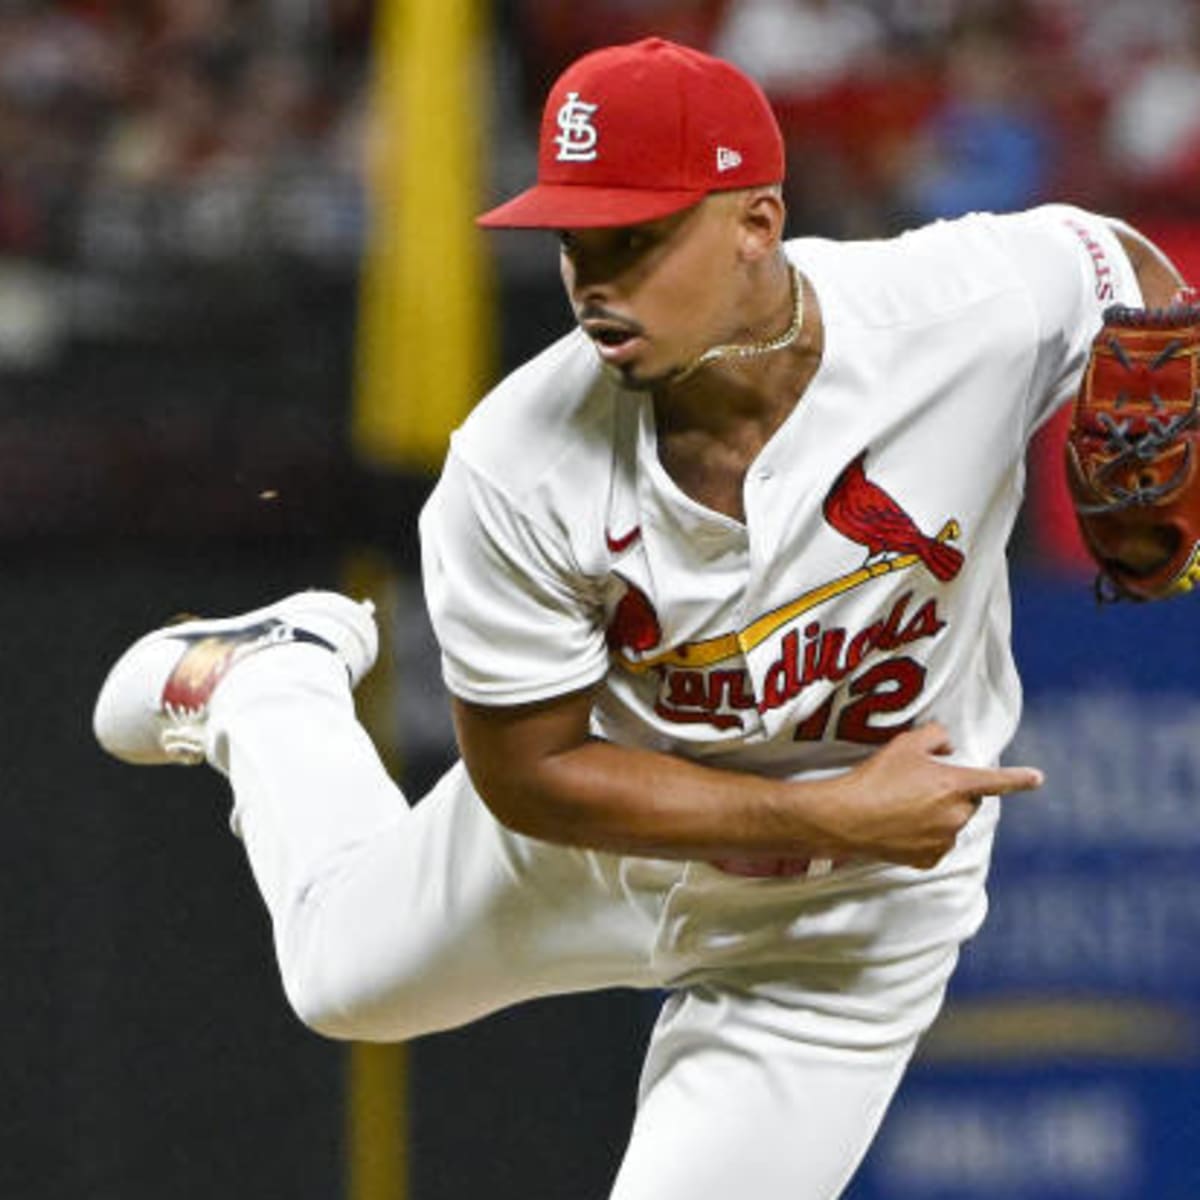 Meet a potential Braves trade partner: The St. Louis Cardinals